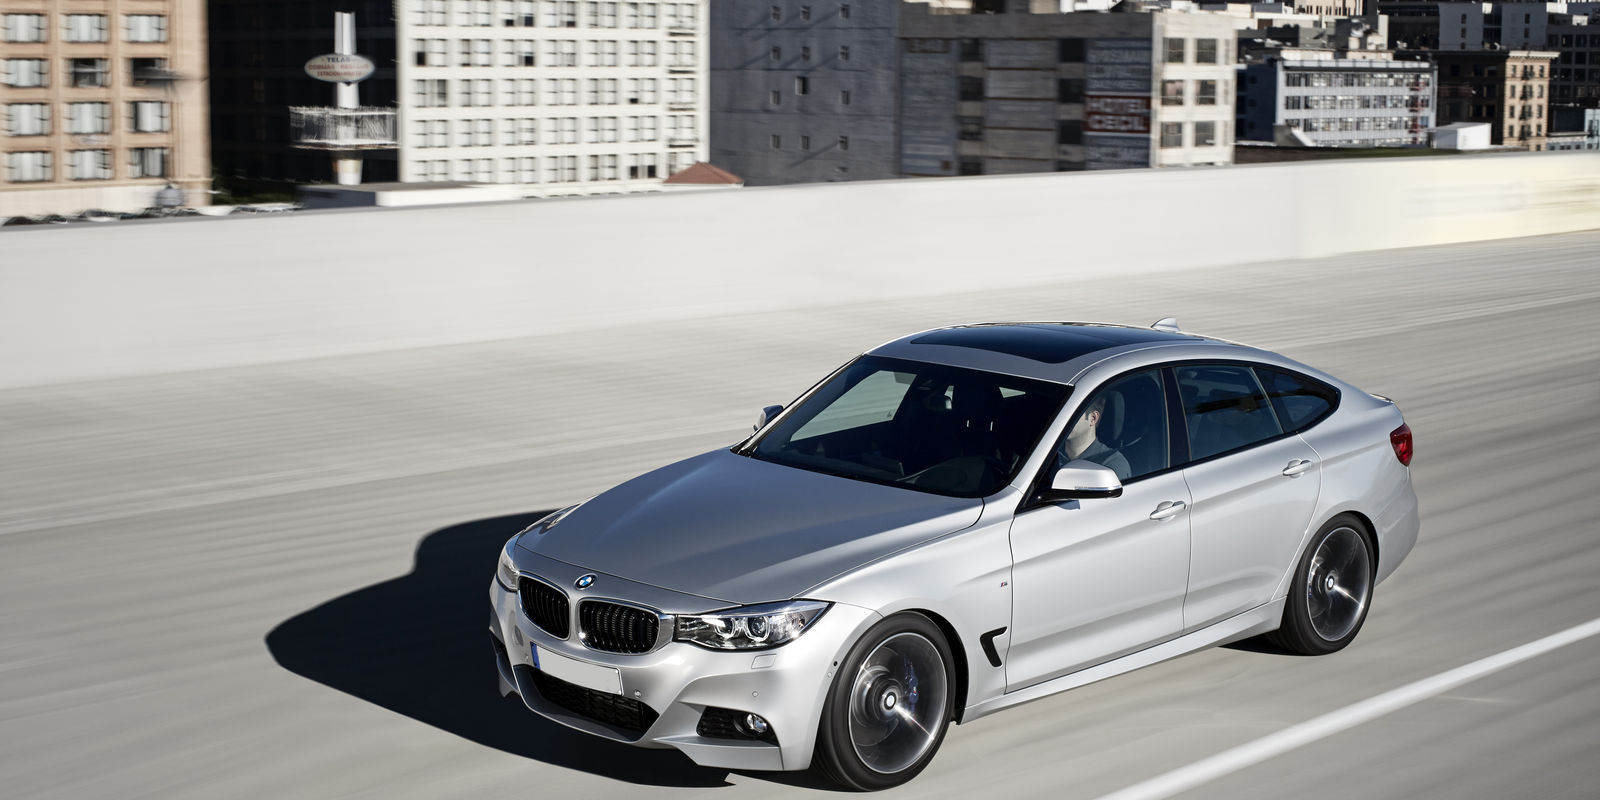 BMW 3 Series Gran Turismo Backgrounds, Compatible - PC, Mobile, Gadgets| 1600x800 px